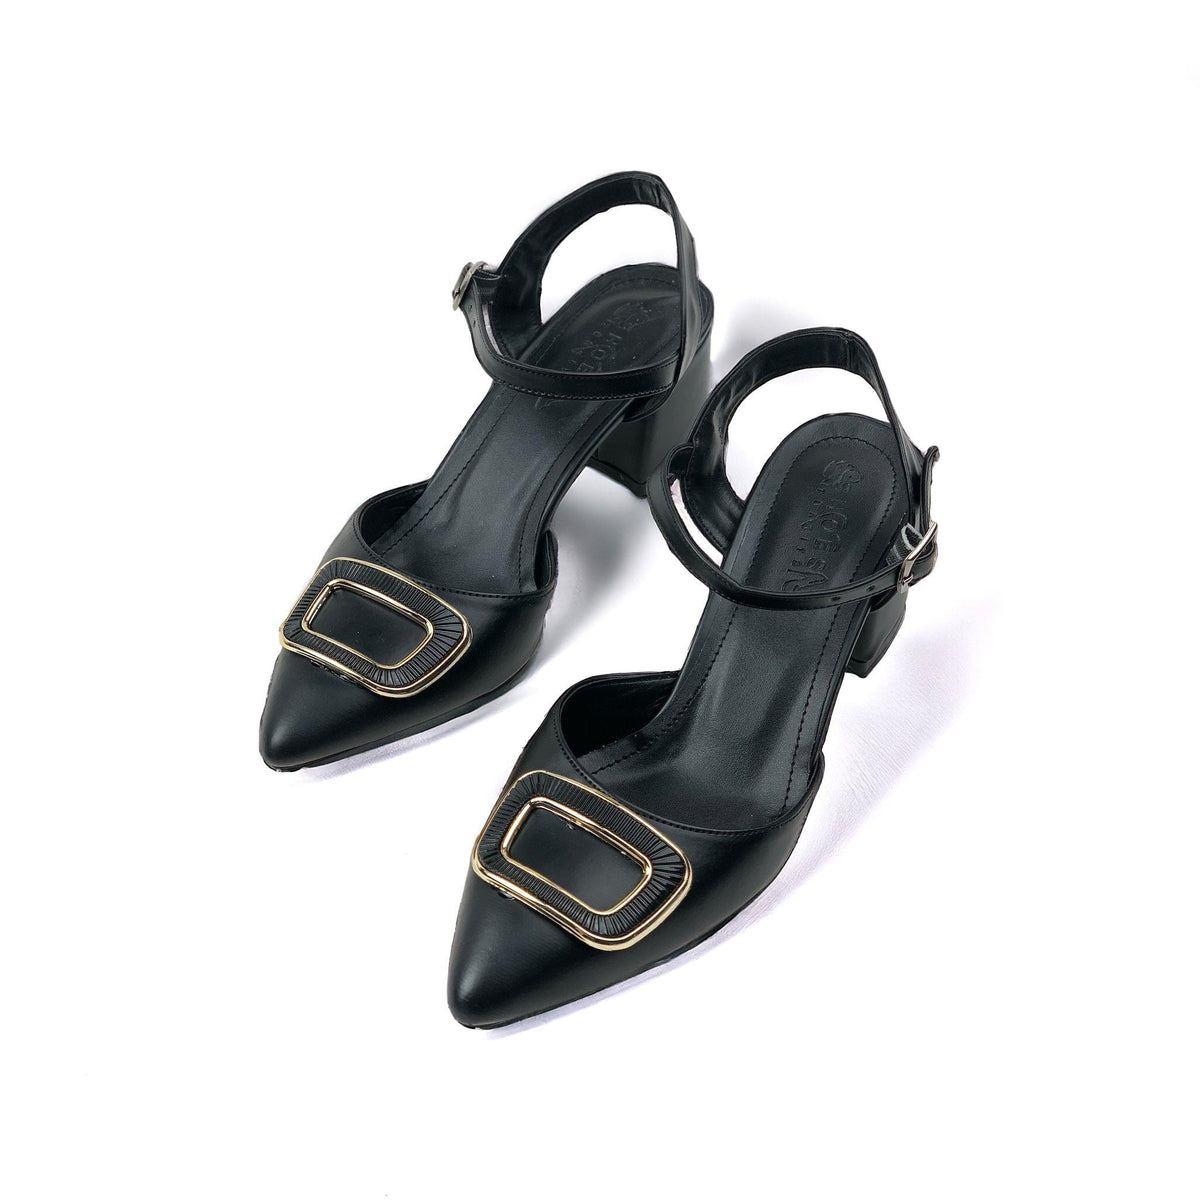 Women's Saree Black Ankle Strap Heeled Shoes Ballerinas - STREETMODE ™